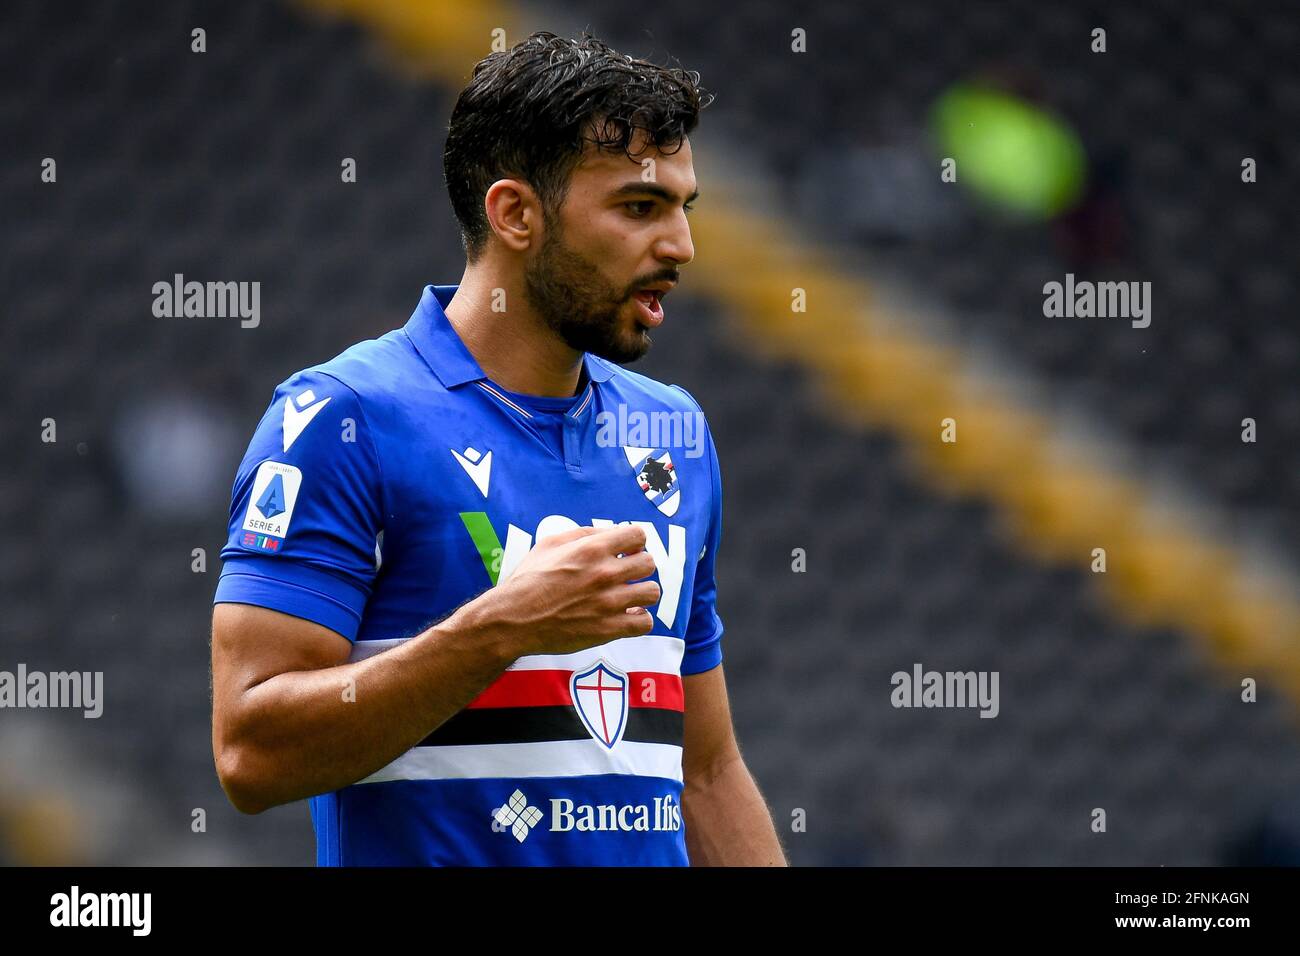 Udine, Italy. 16th May, 2021. Mehdi Leris (Sampdoria) during Udinese Calcio vs UC Sampdoria, Italian football Serie A match in Udine, Italy, May 16 2021 Credit: Independent Photo Agency/Alamy Live News Stock Photo